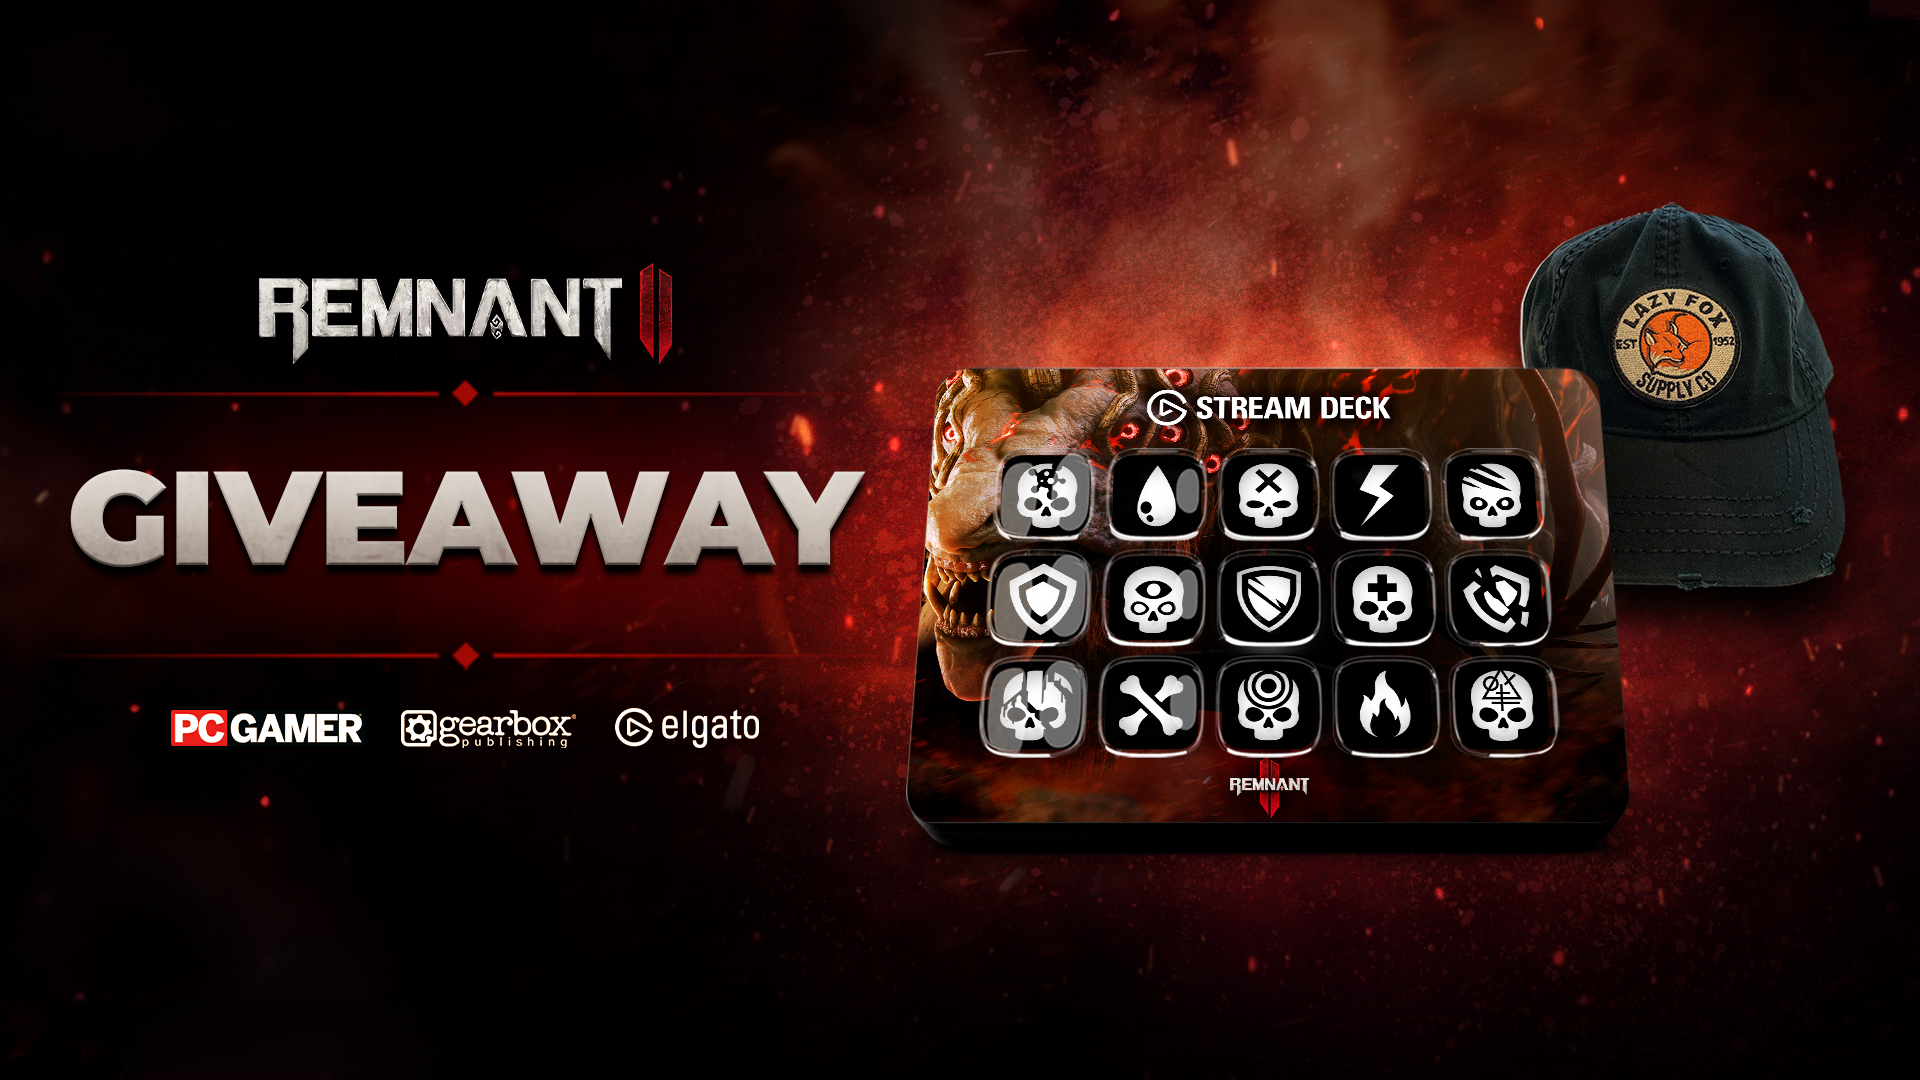  Win a Remnant 2-styled Stream Deck, Game Codes, and a cool hat to celebrate the launch of The Awakened King DLC 